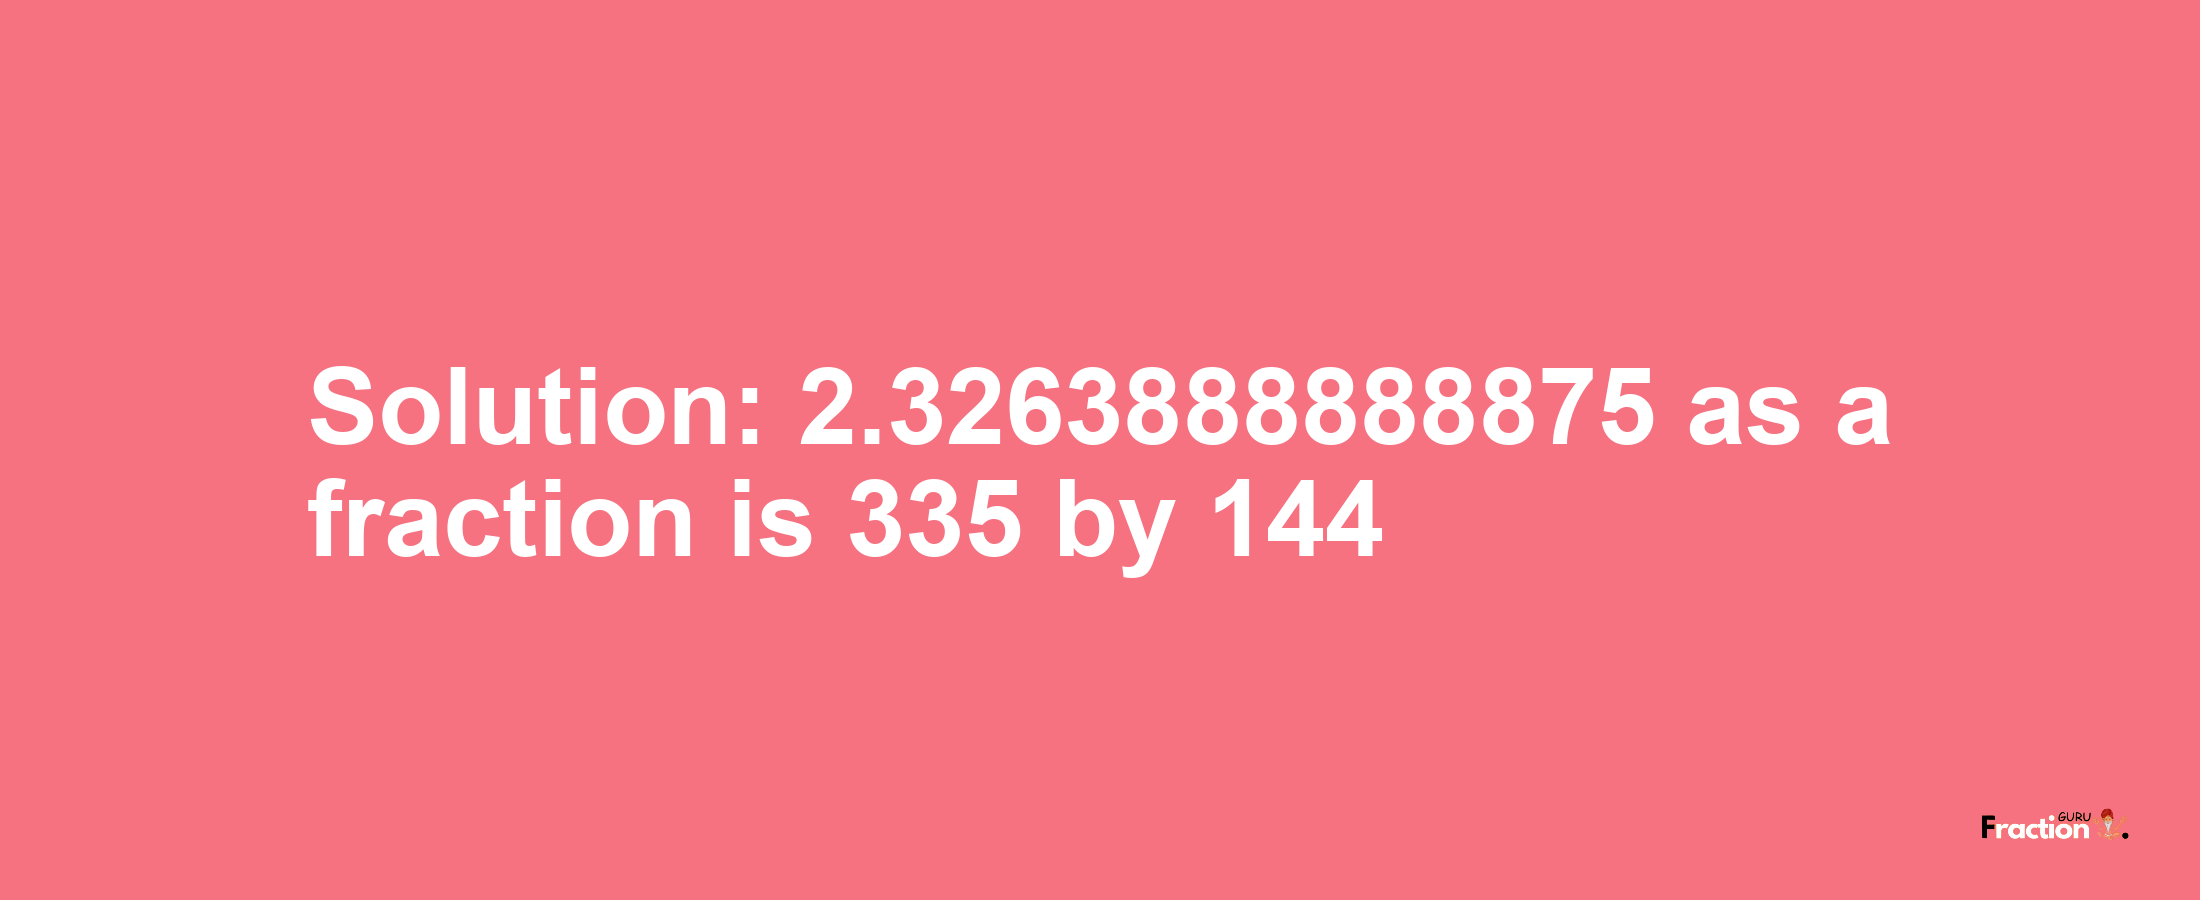 Solution:2.3263888888875 as a fraction is 335/144